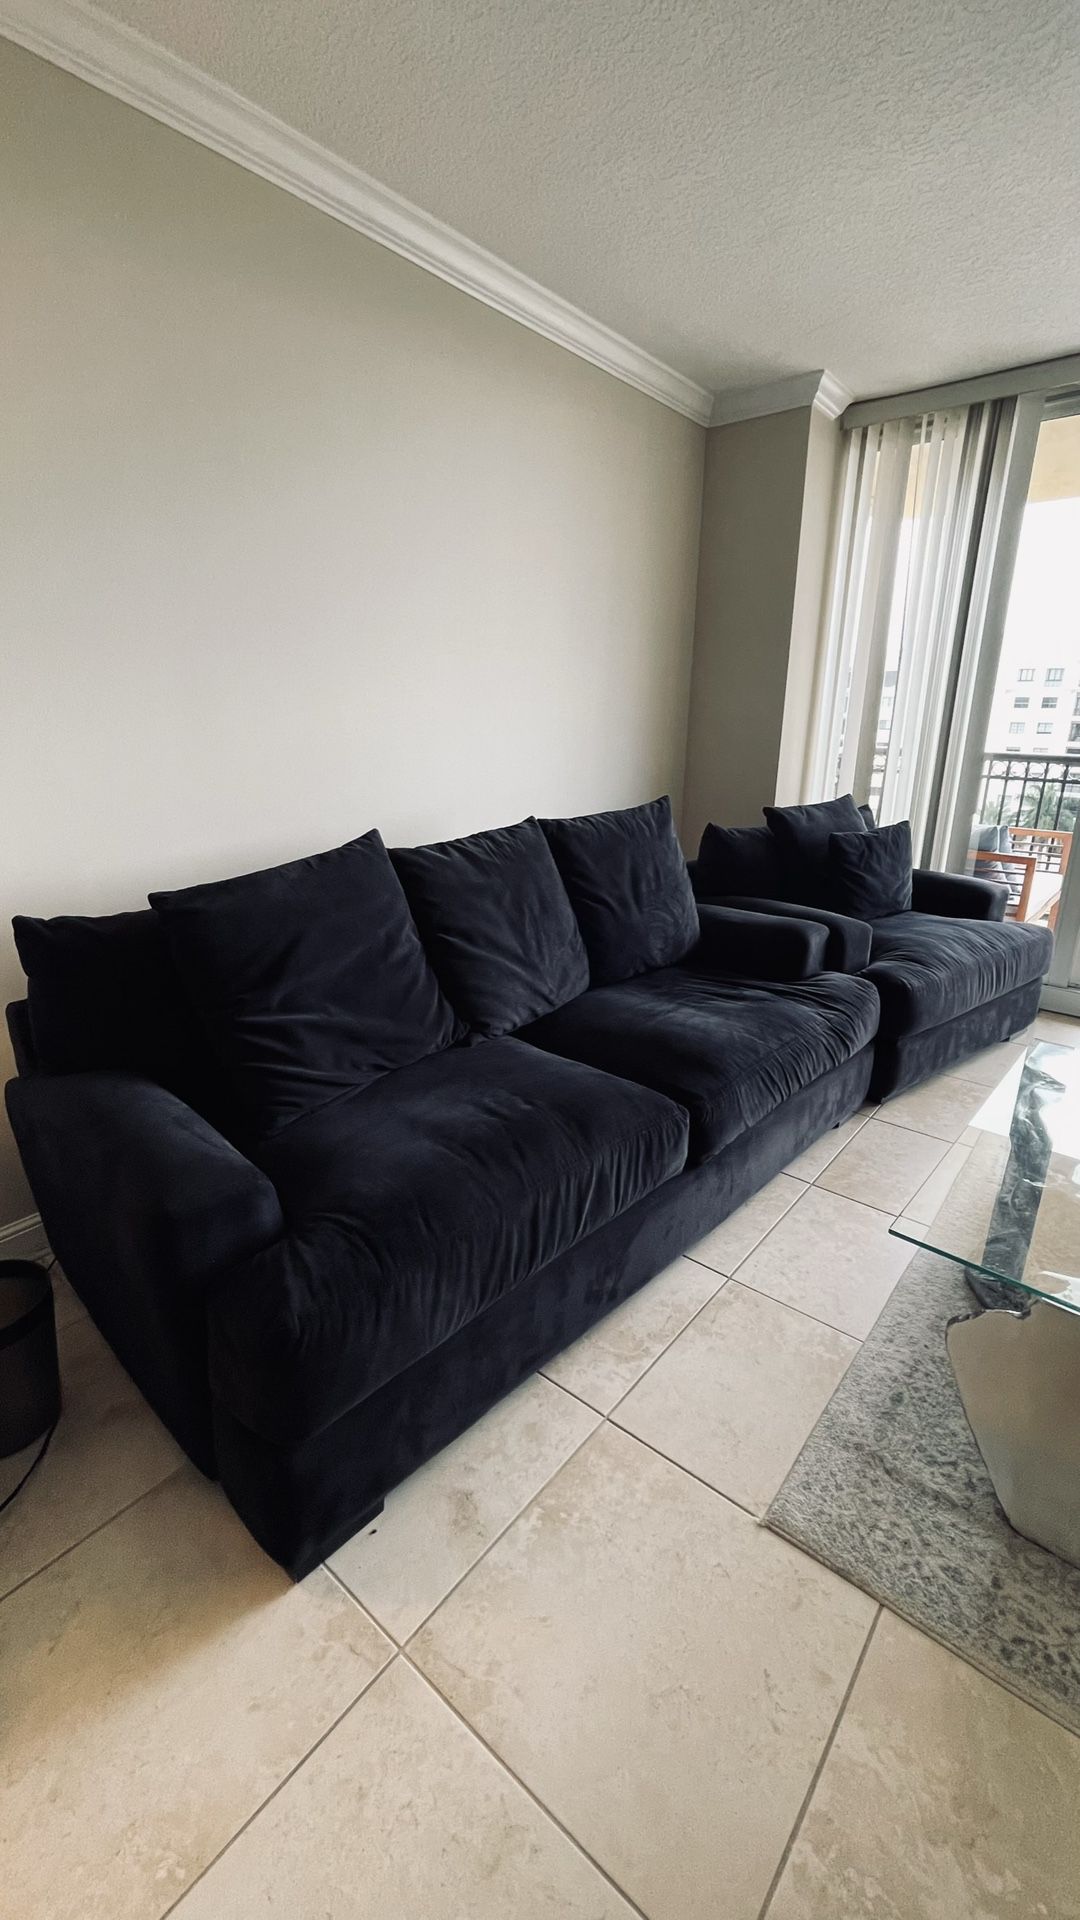  Z Gallery Gorgeous Black Couch Pick Up Brickell. Excellent Cond